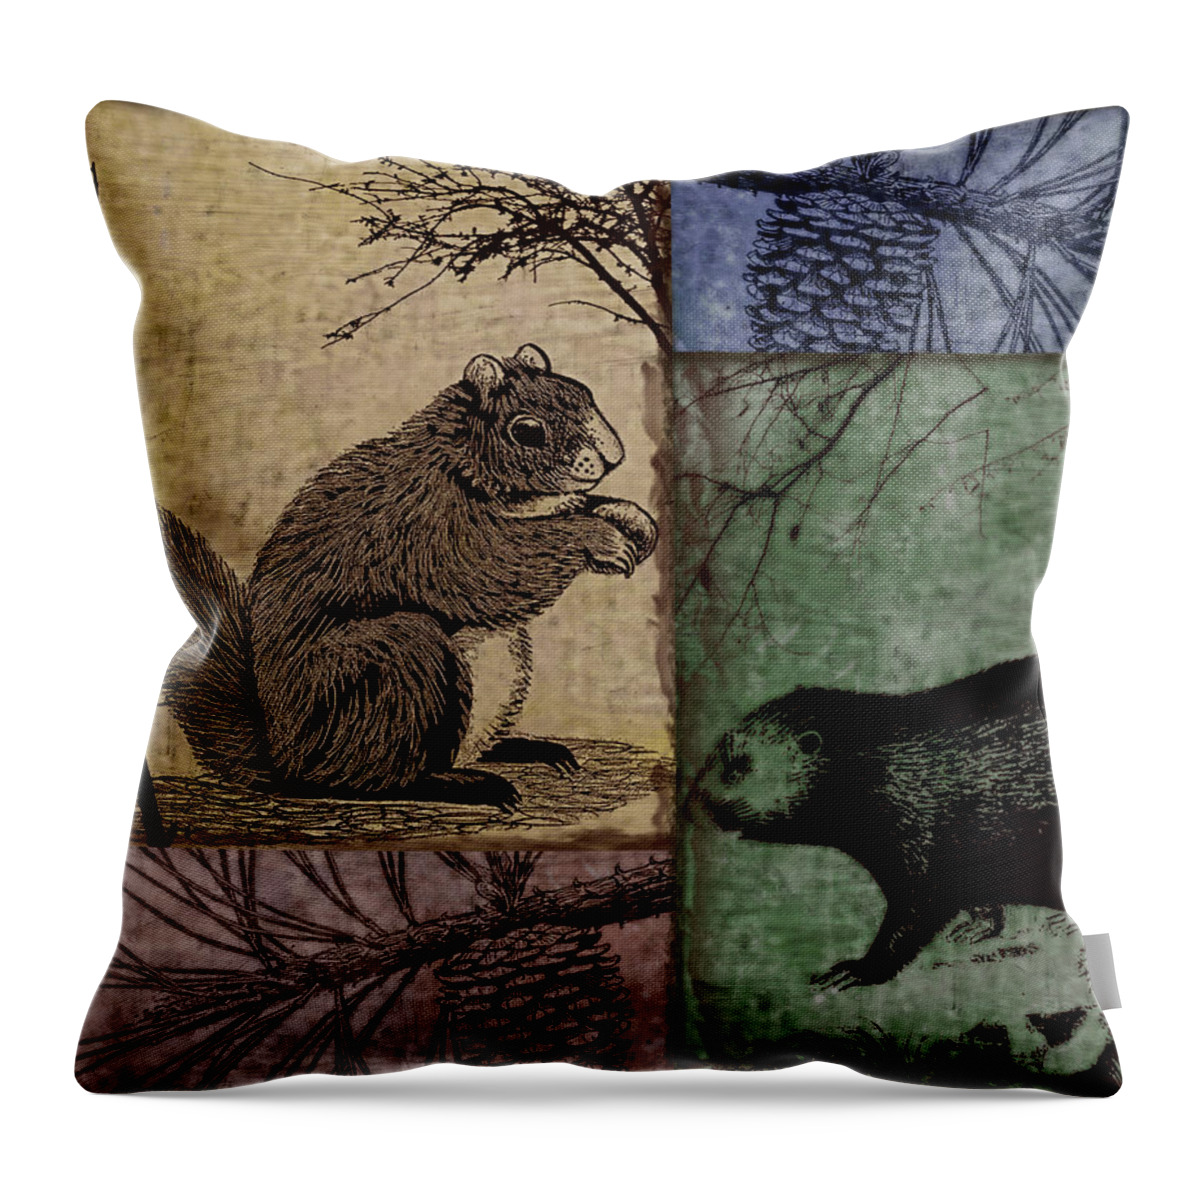 Squirrel Throw Pillow featuring the painting Wildlife Patchwork Squirrel by Mindy Sommers